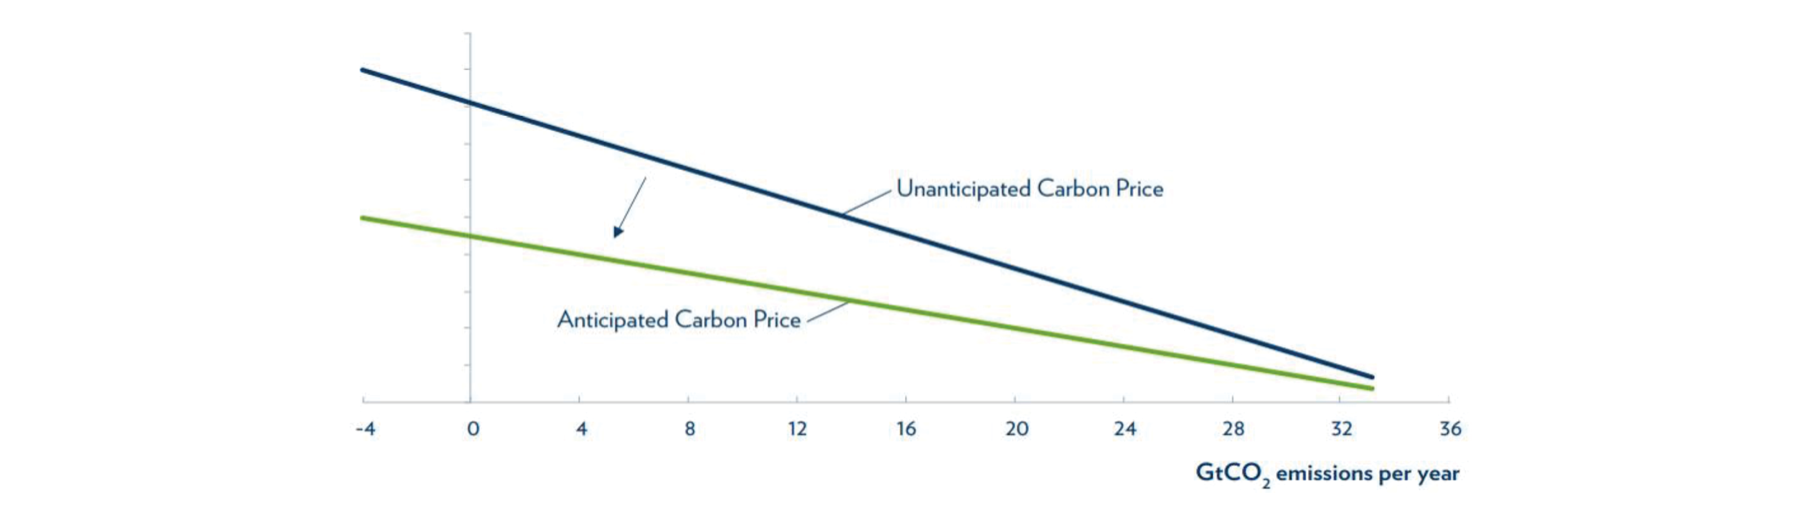 mark-carney-memo_climate-policy-figure-15.png